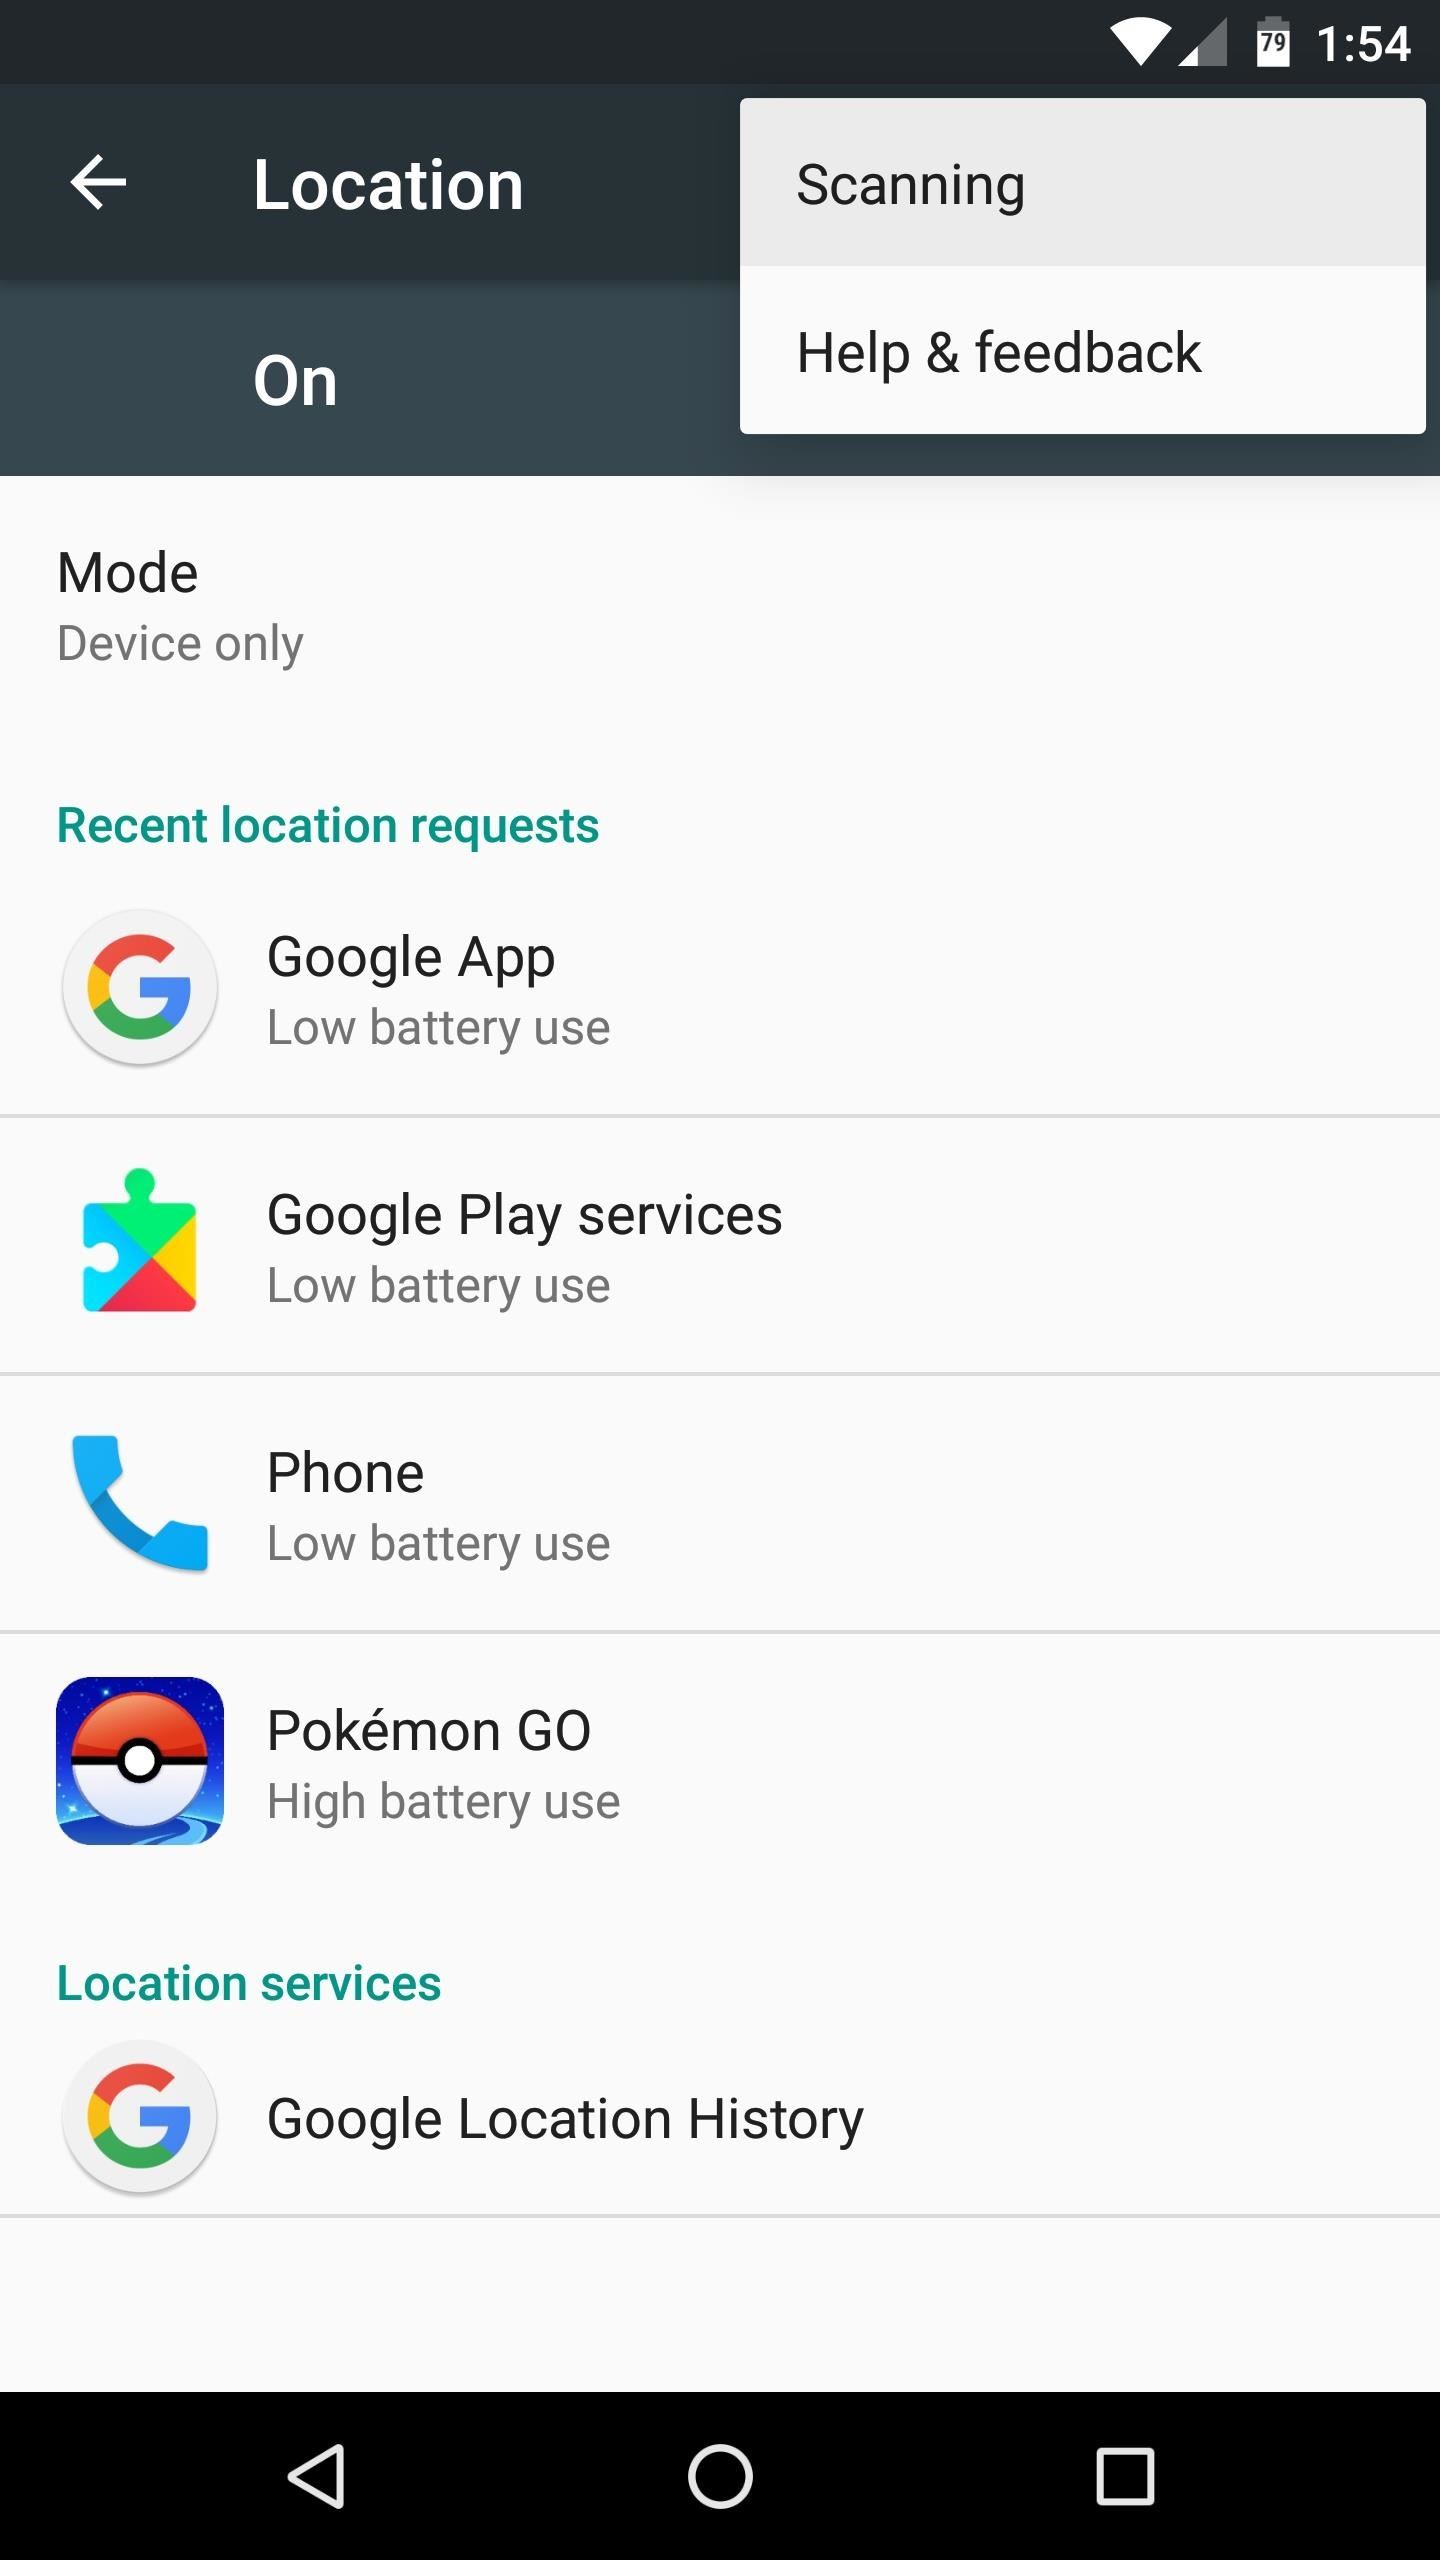 How to Cheat at Pokémon GO Without Getting Banned